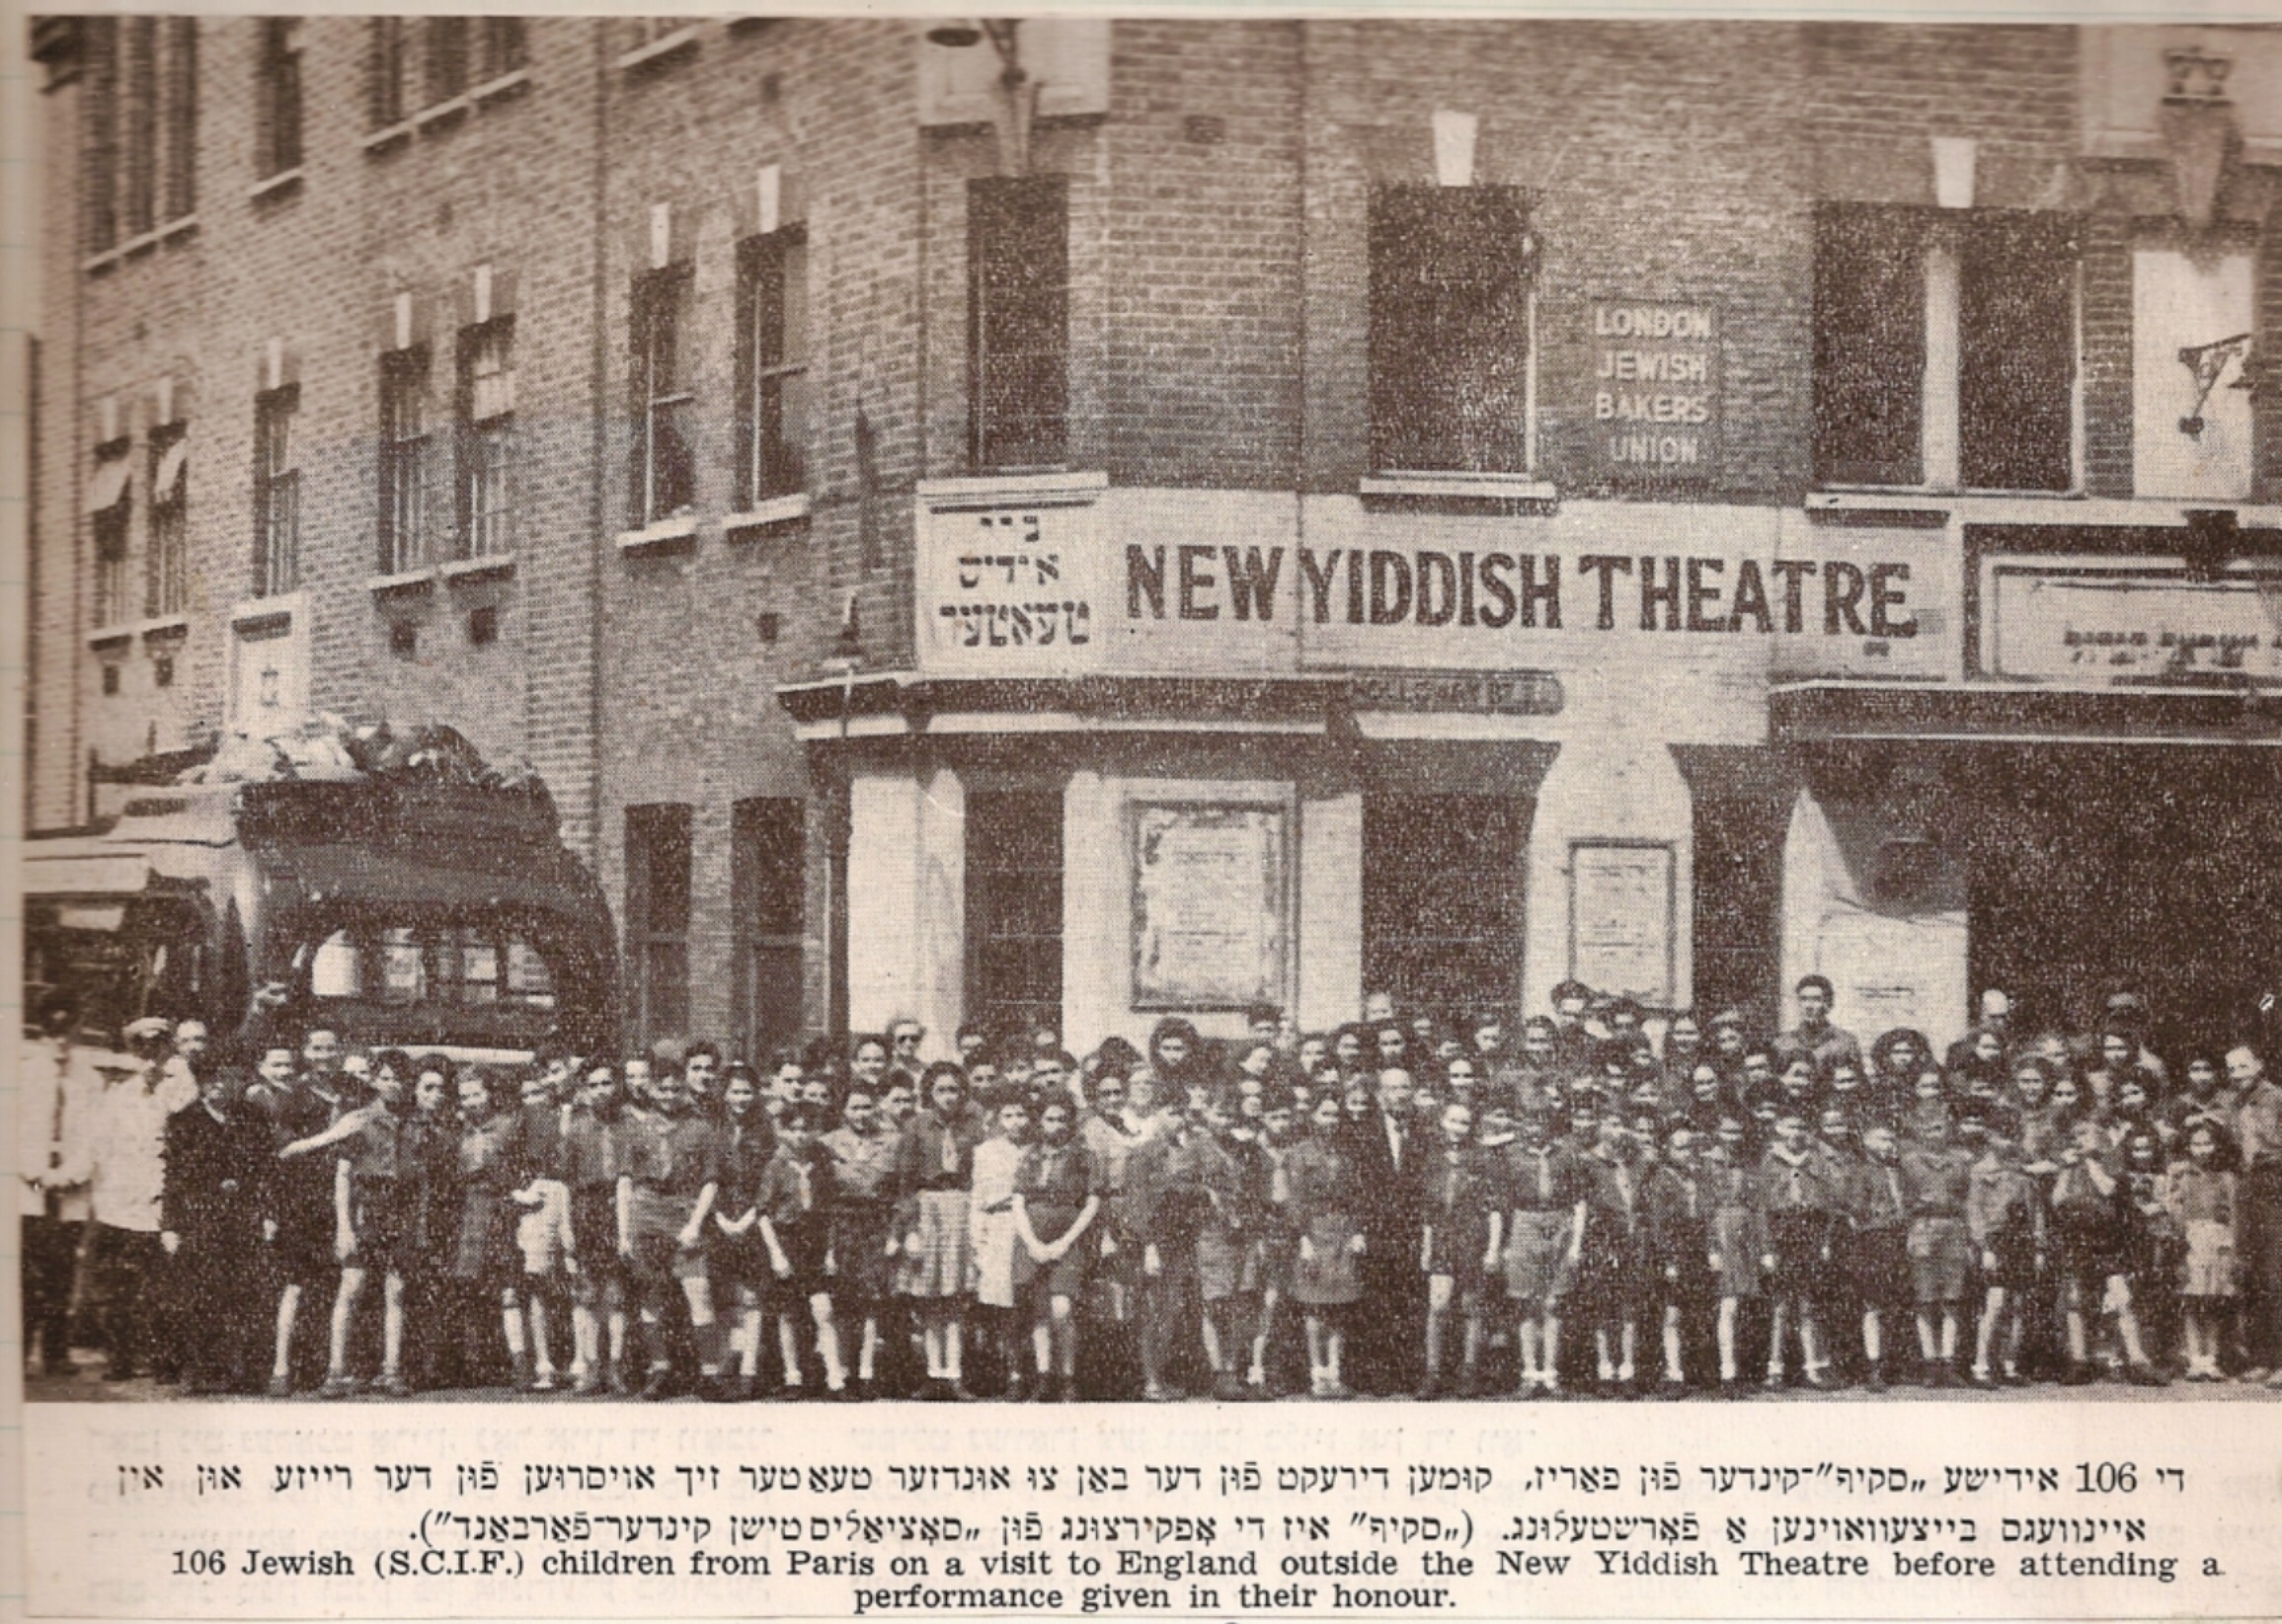 New Yiddish Theatre, October 1946, corner of Adler Street and Commercial Road